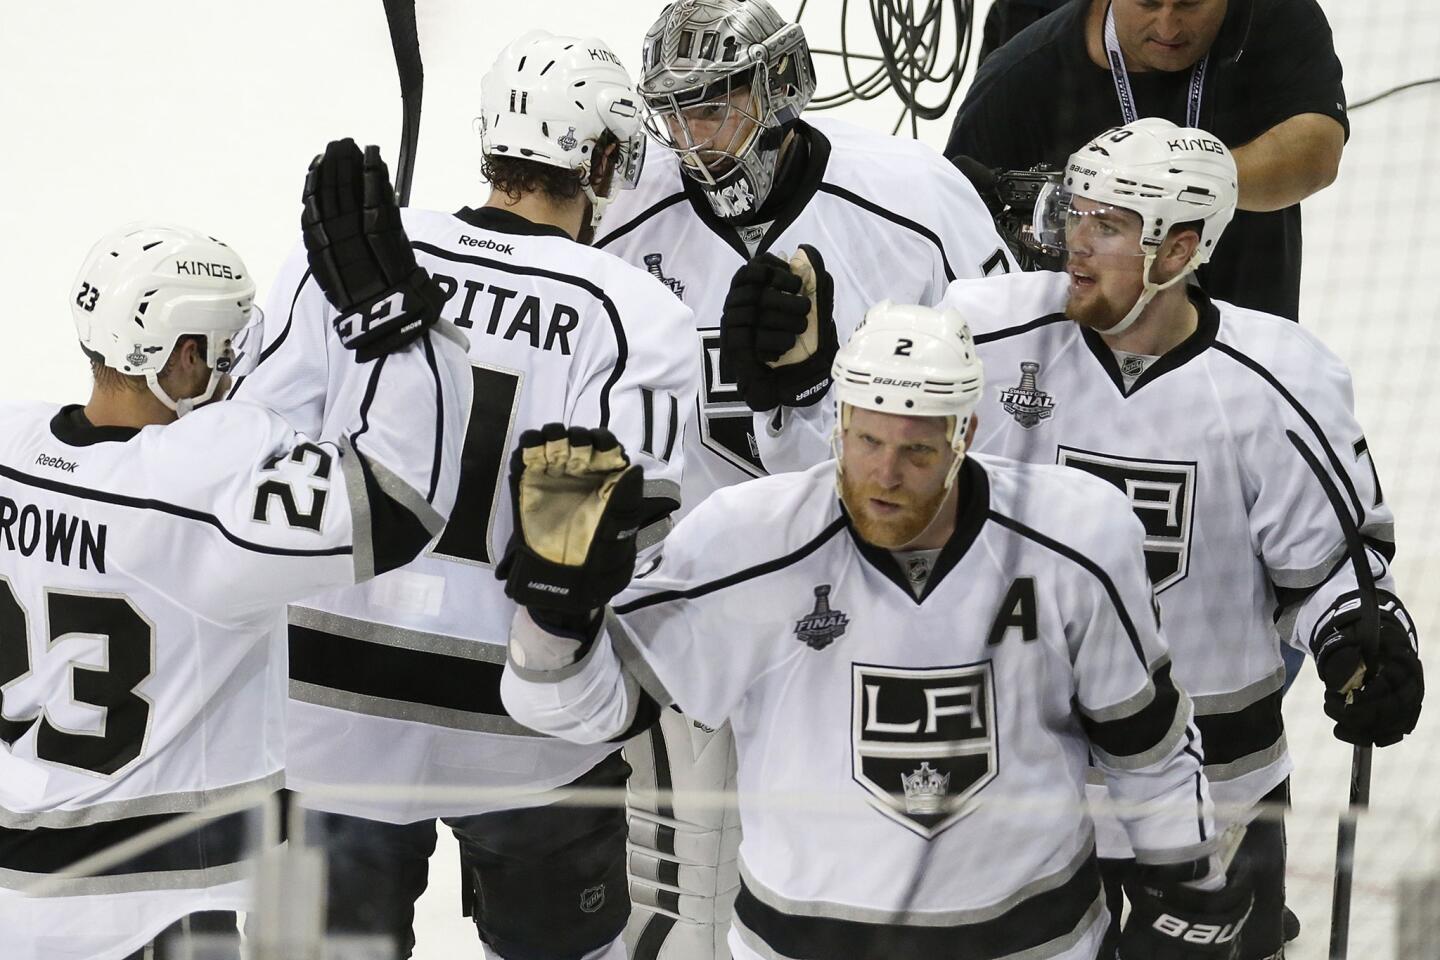 Kings players celebrate the team's 3-0 win over the New York Rangers in Game 3 of the Stanley Cup Final.